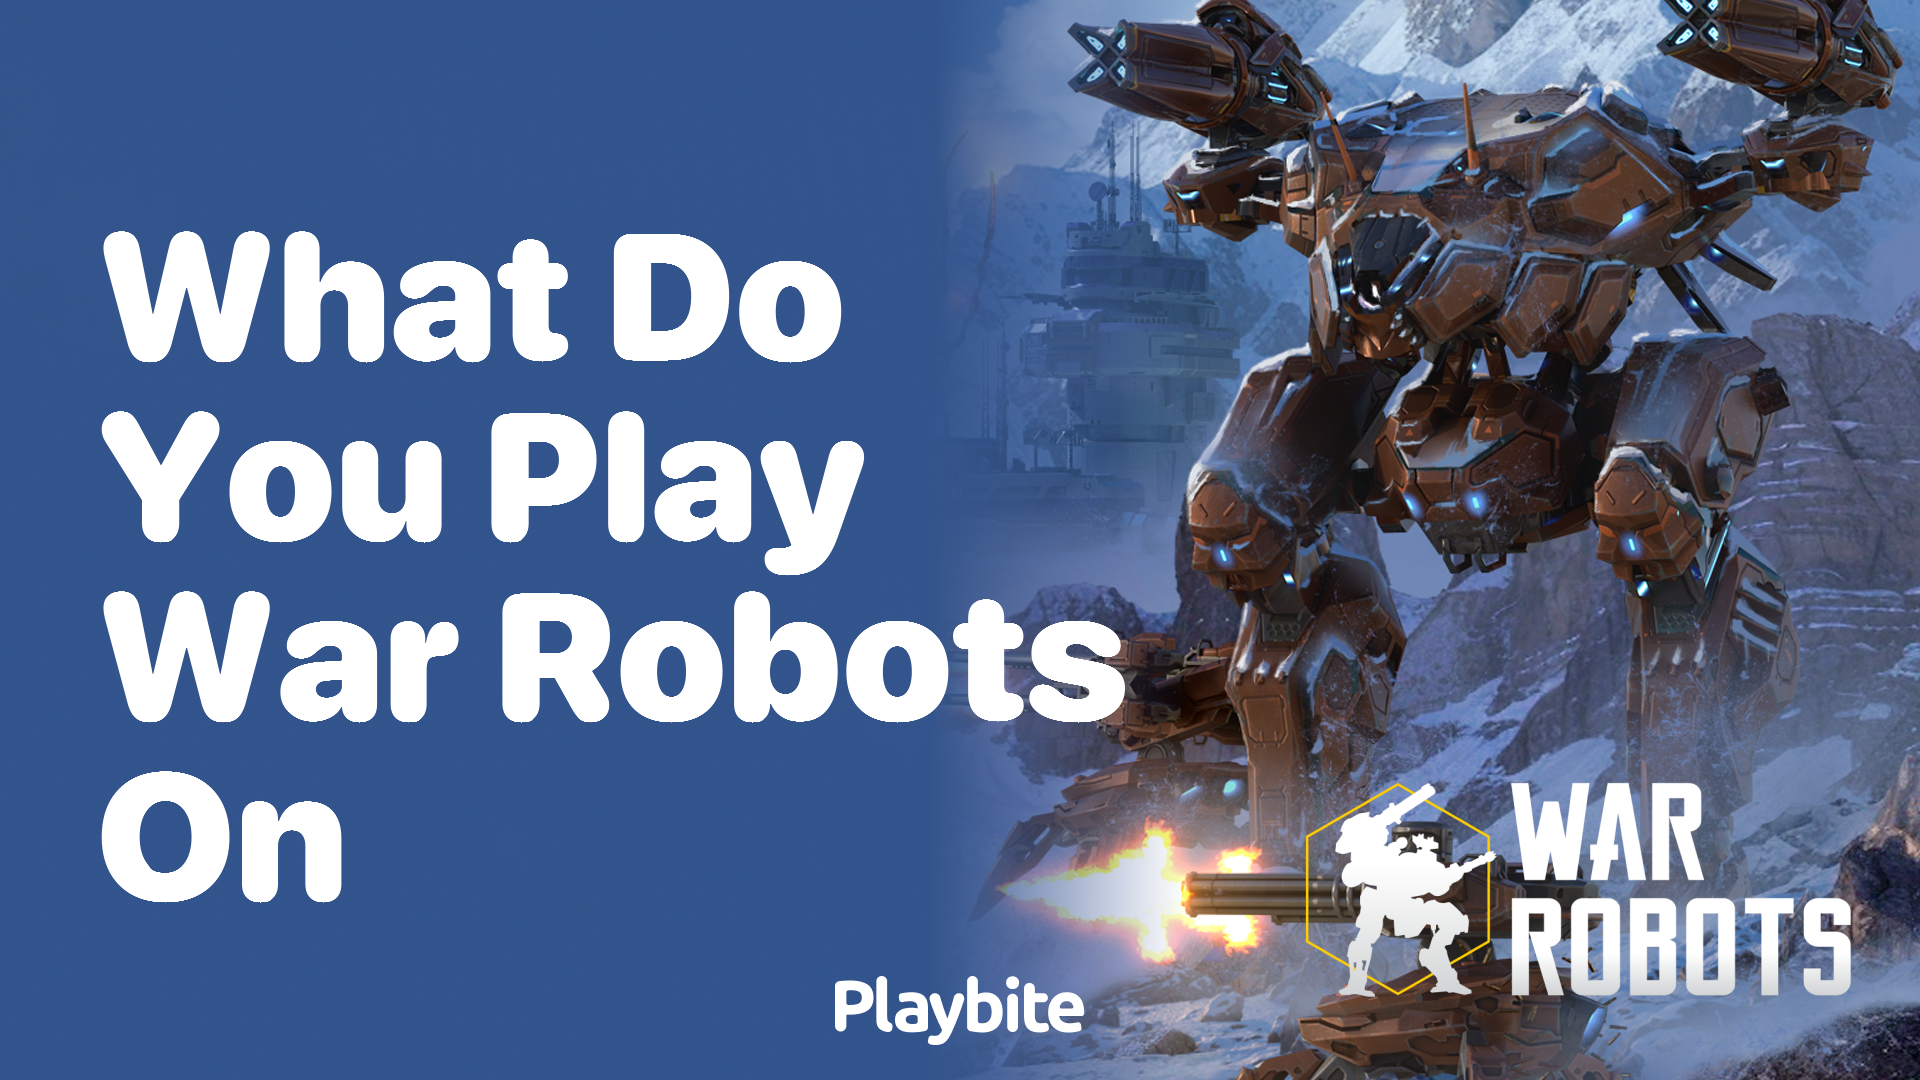 What Devices Can You Play War Robots On?